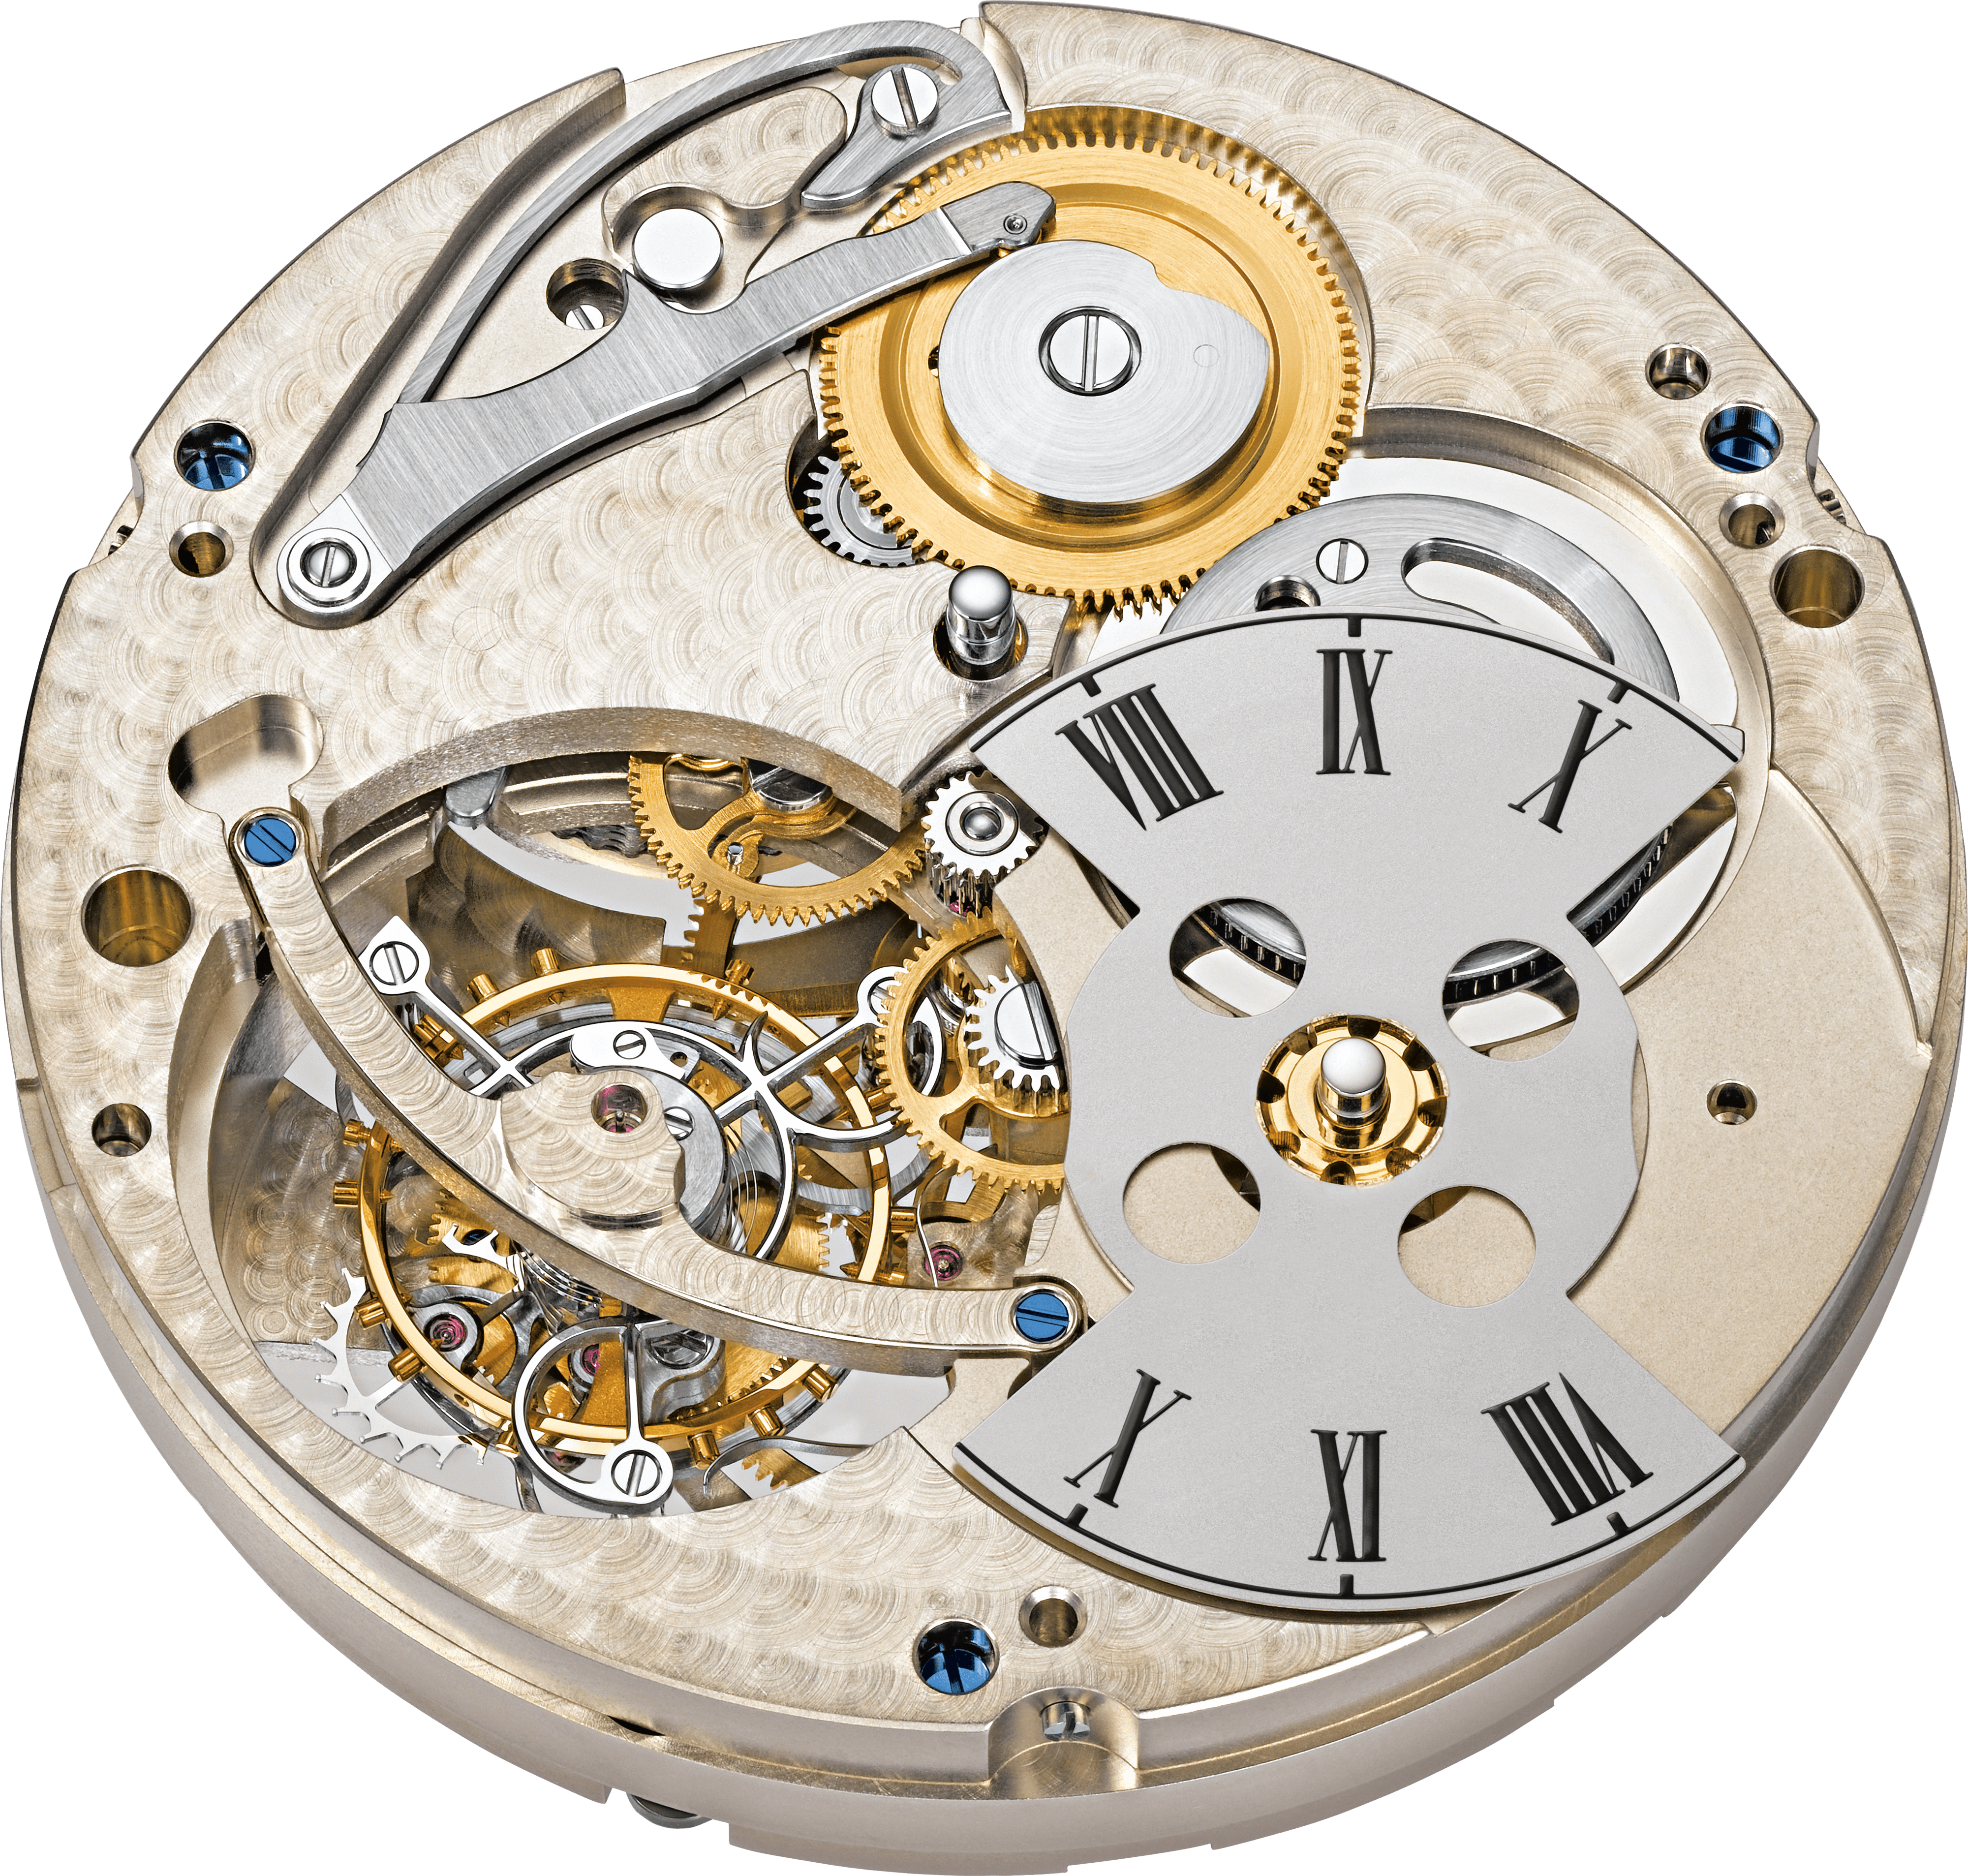 Imitation Maurice Lacroix Watches